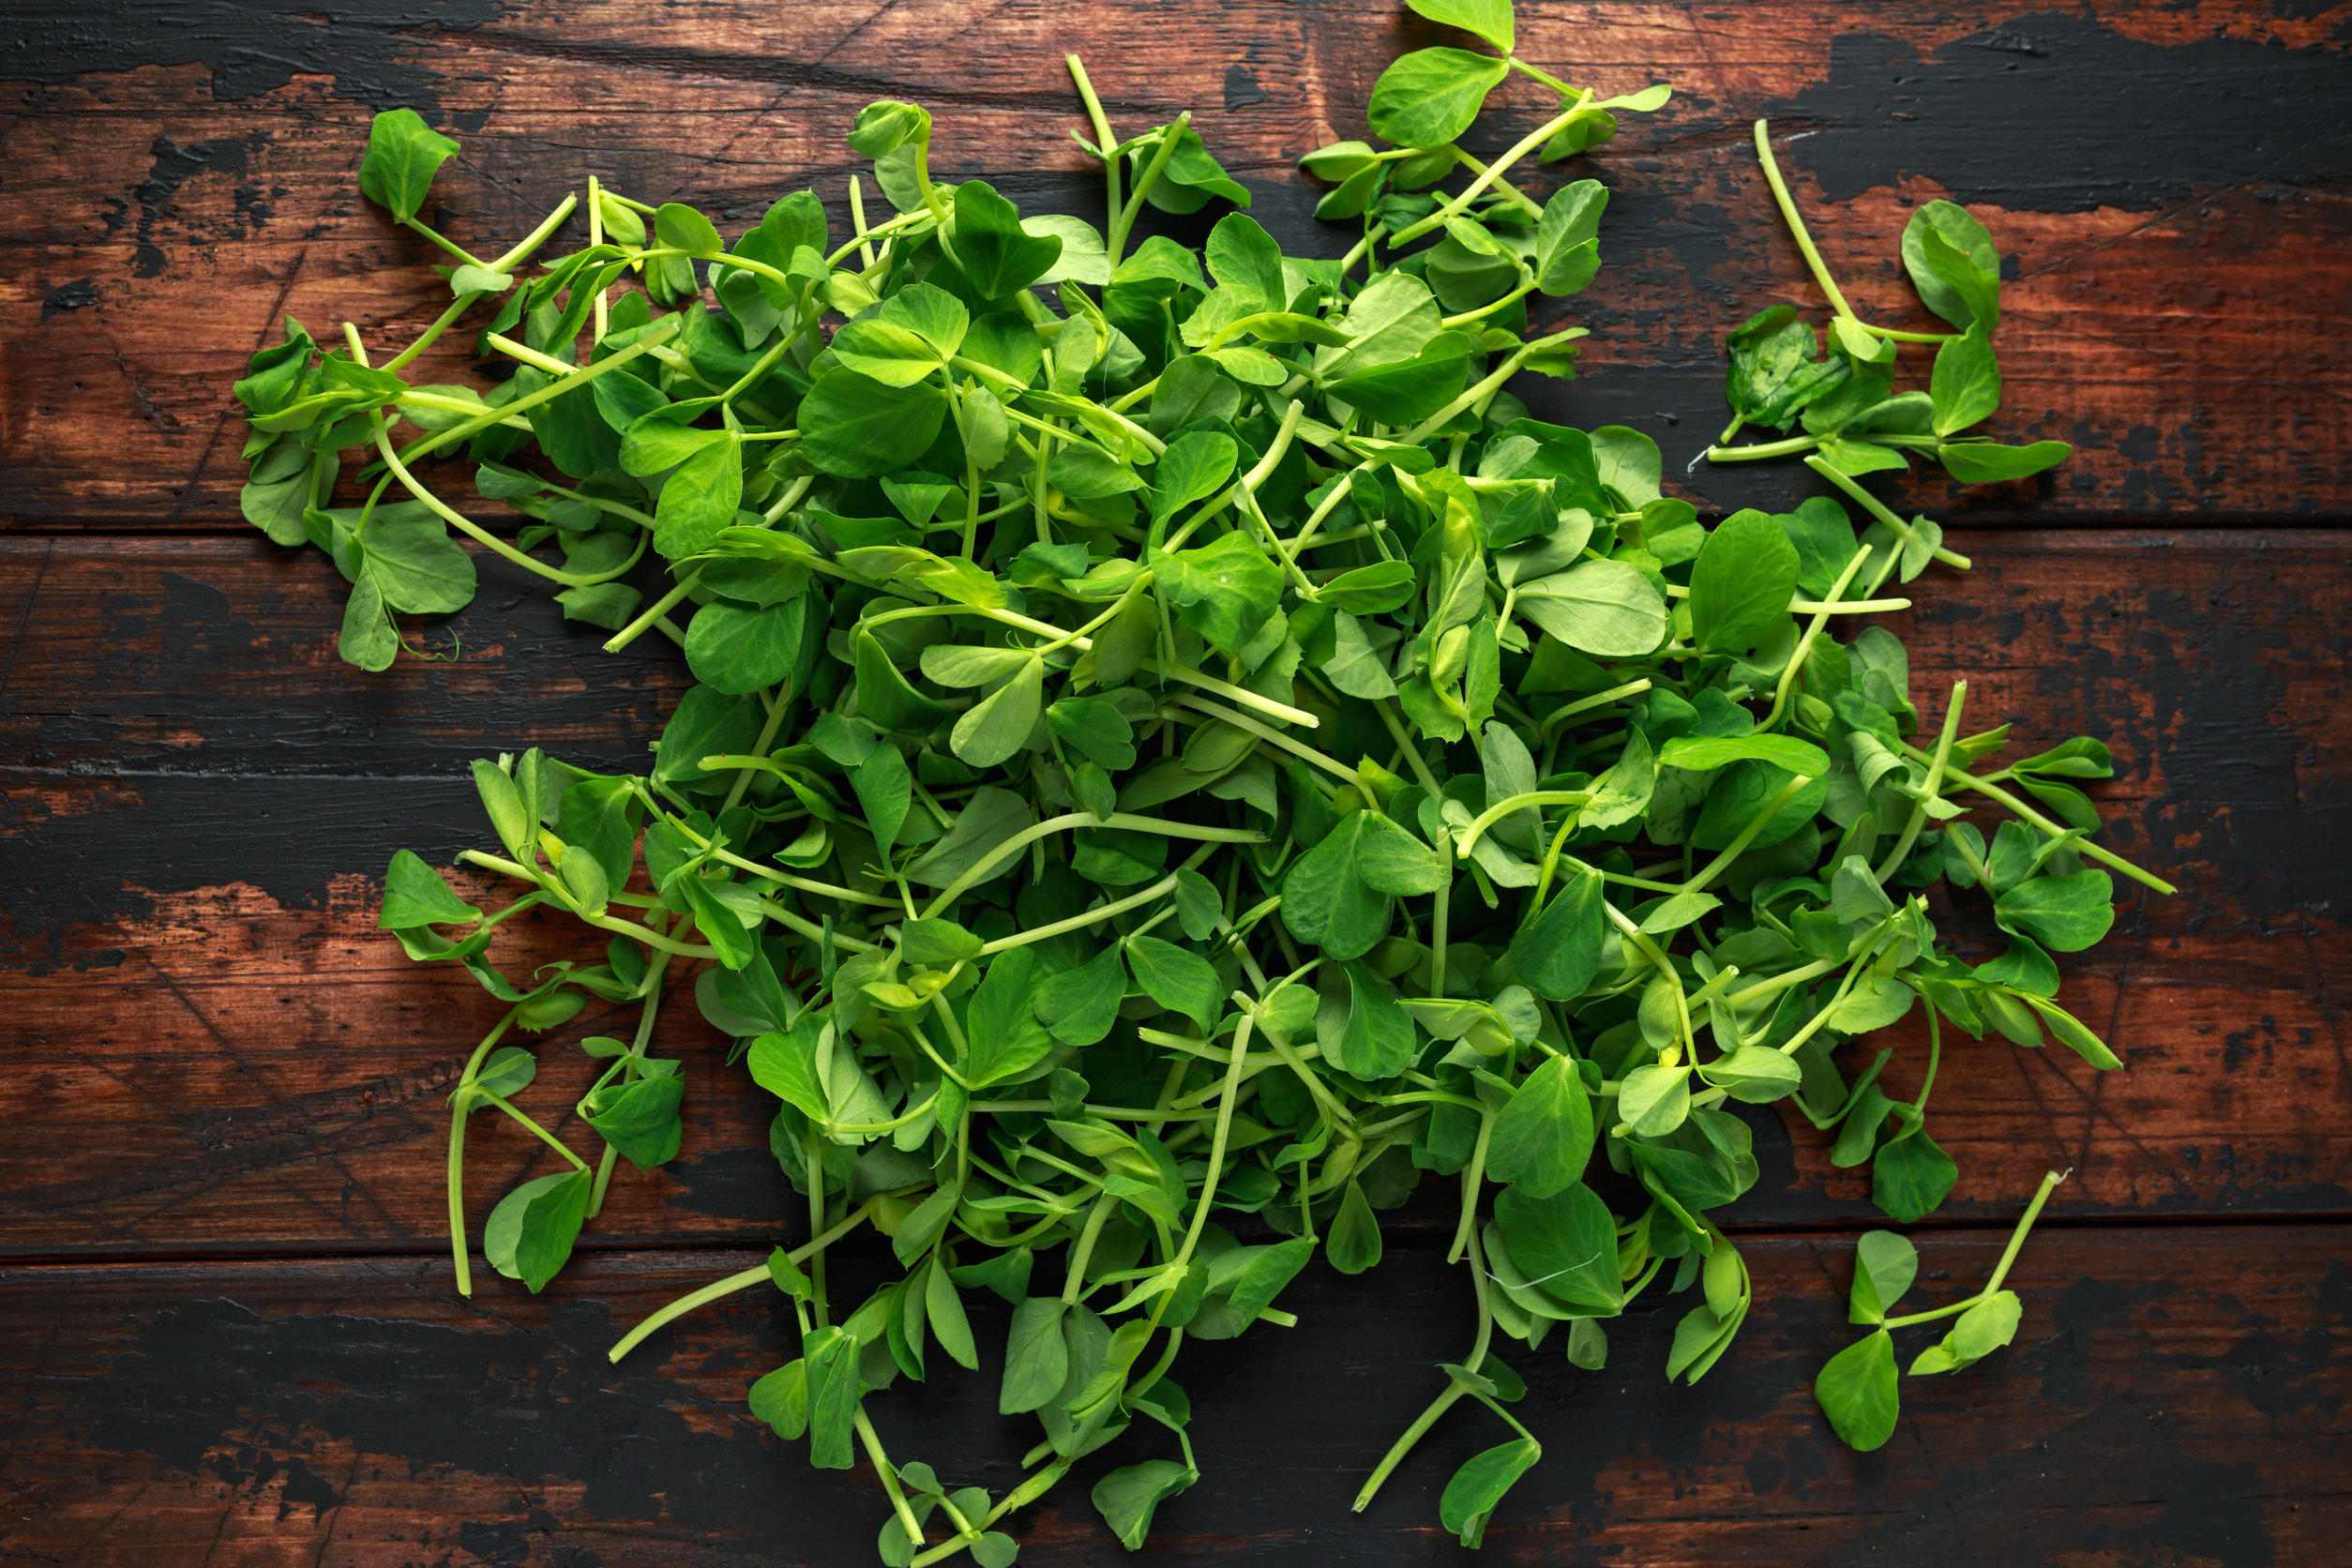 Snow Pea Sprouts For Restaurants